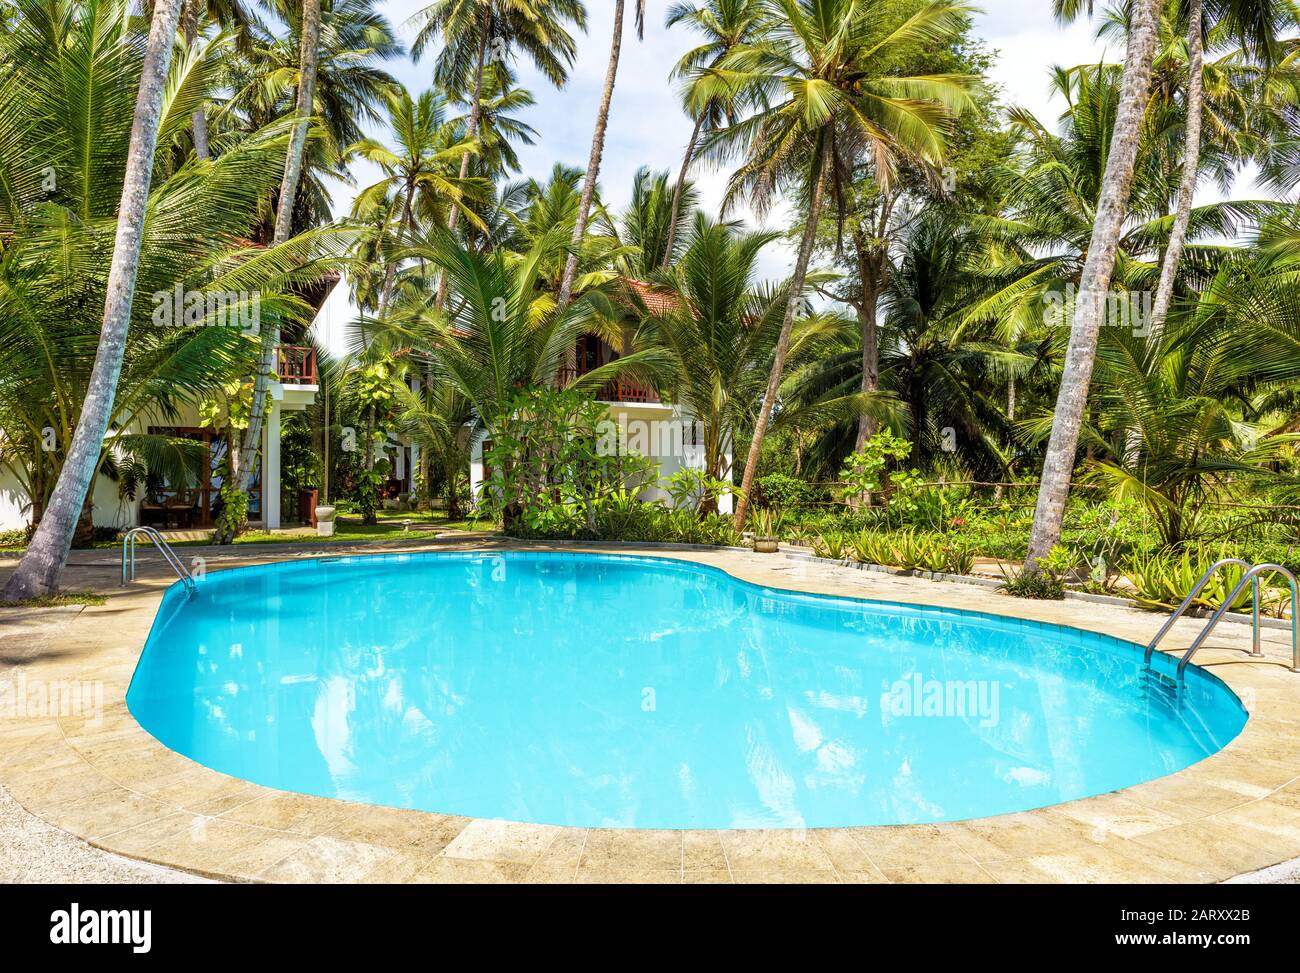 Tangalle, Sri Lanka - November 4, 2017: Swimming pool and houses in tropical hotel. Idyllic sunny place among palm trees. Picturesque hotel to relax i Stock Photo